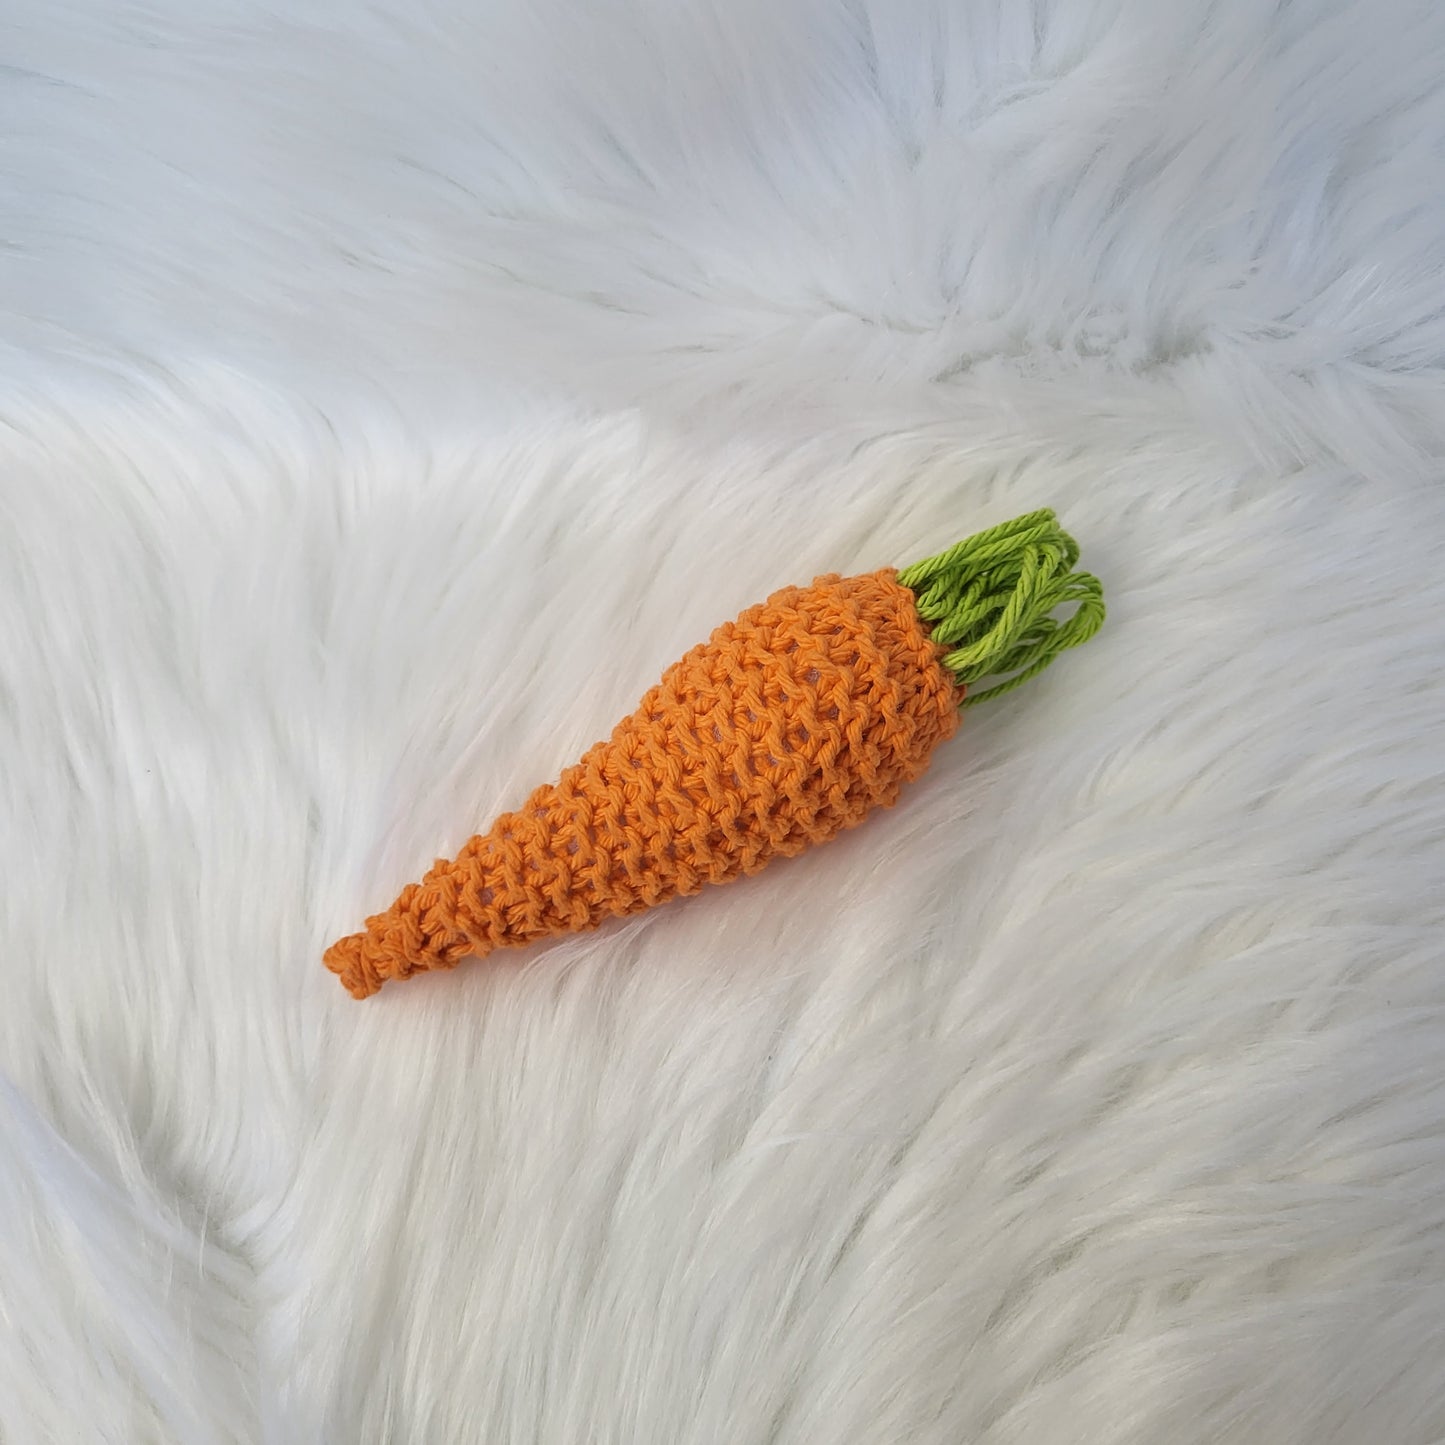 Carrot Catnip Toy Kicker with Bell